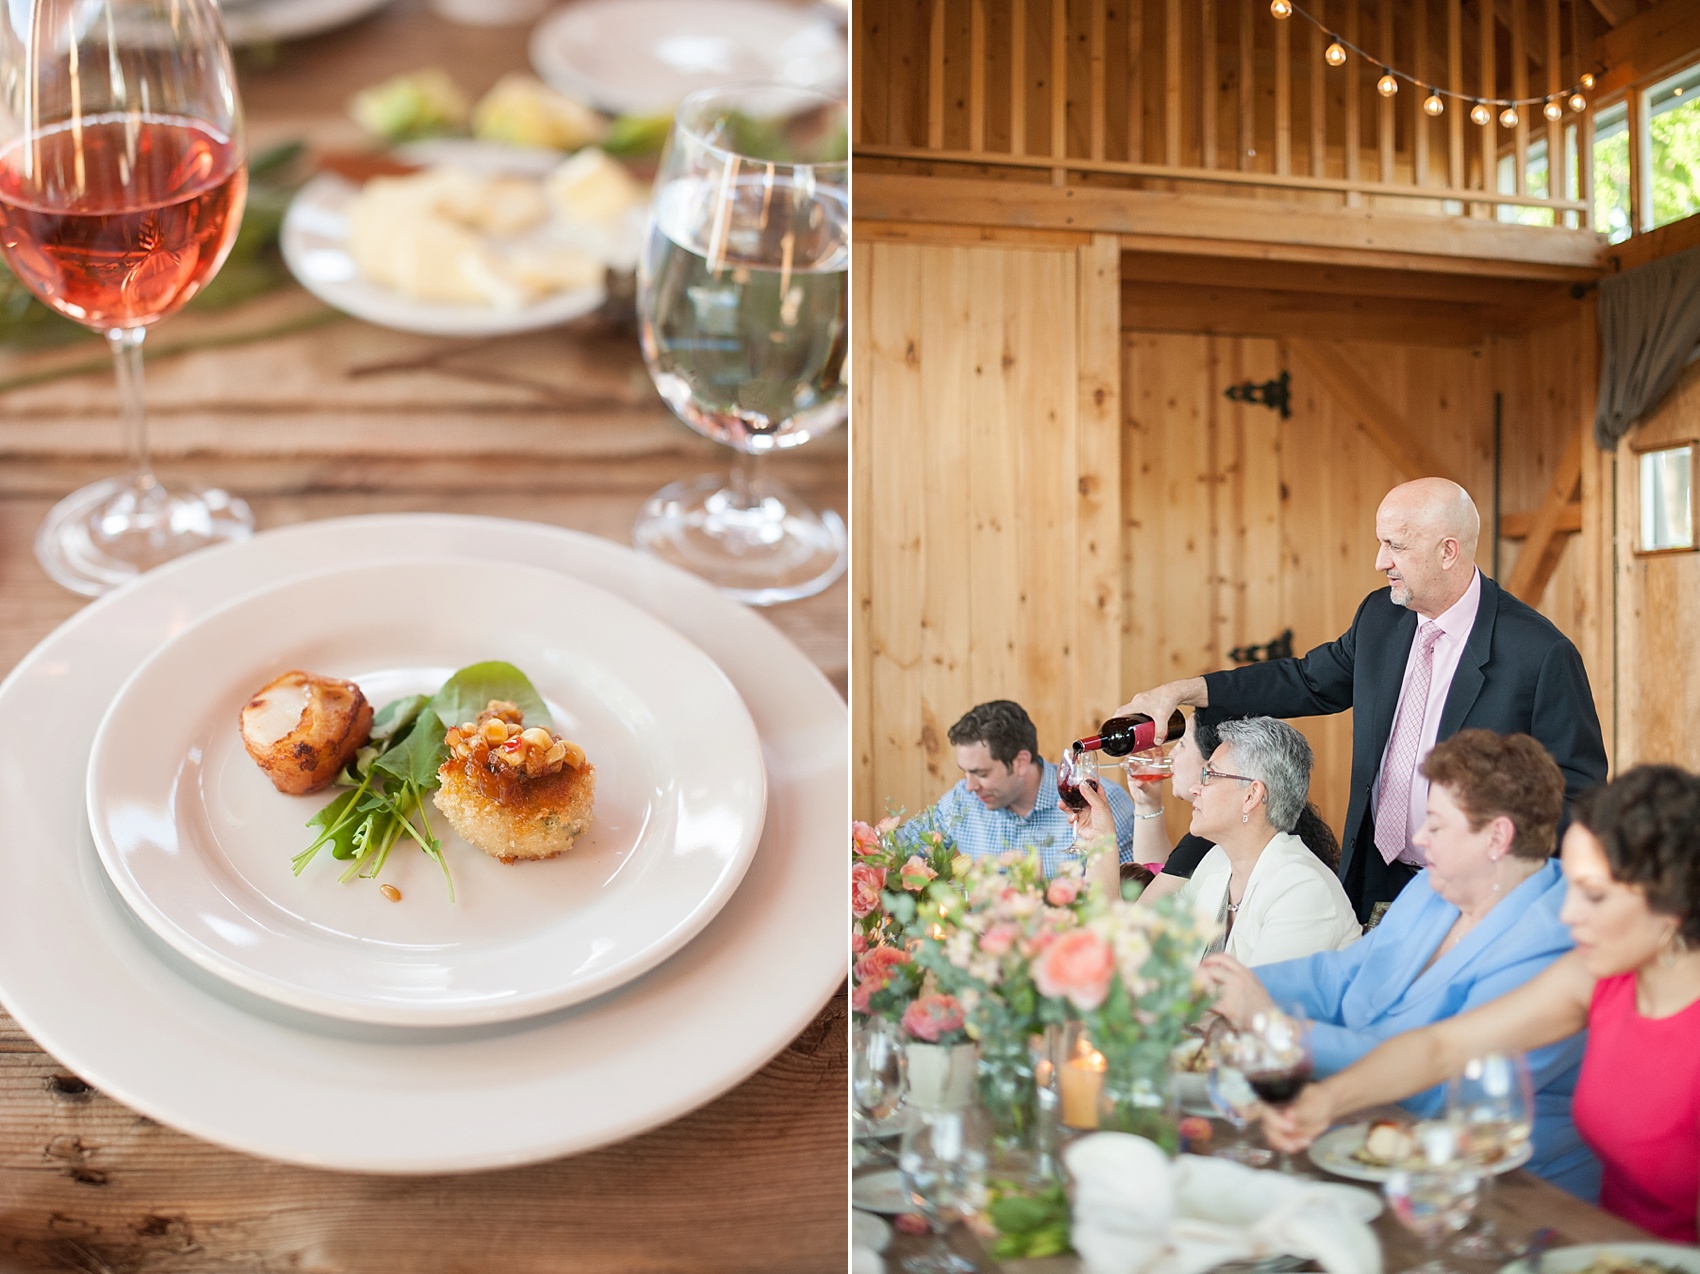 Spring vineyard elopement with barn reception. Photos by Mikkel Paige, destination wedding photographer. Held at HammerSky Vineyard, south of San Francisco. 